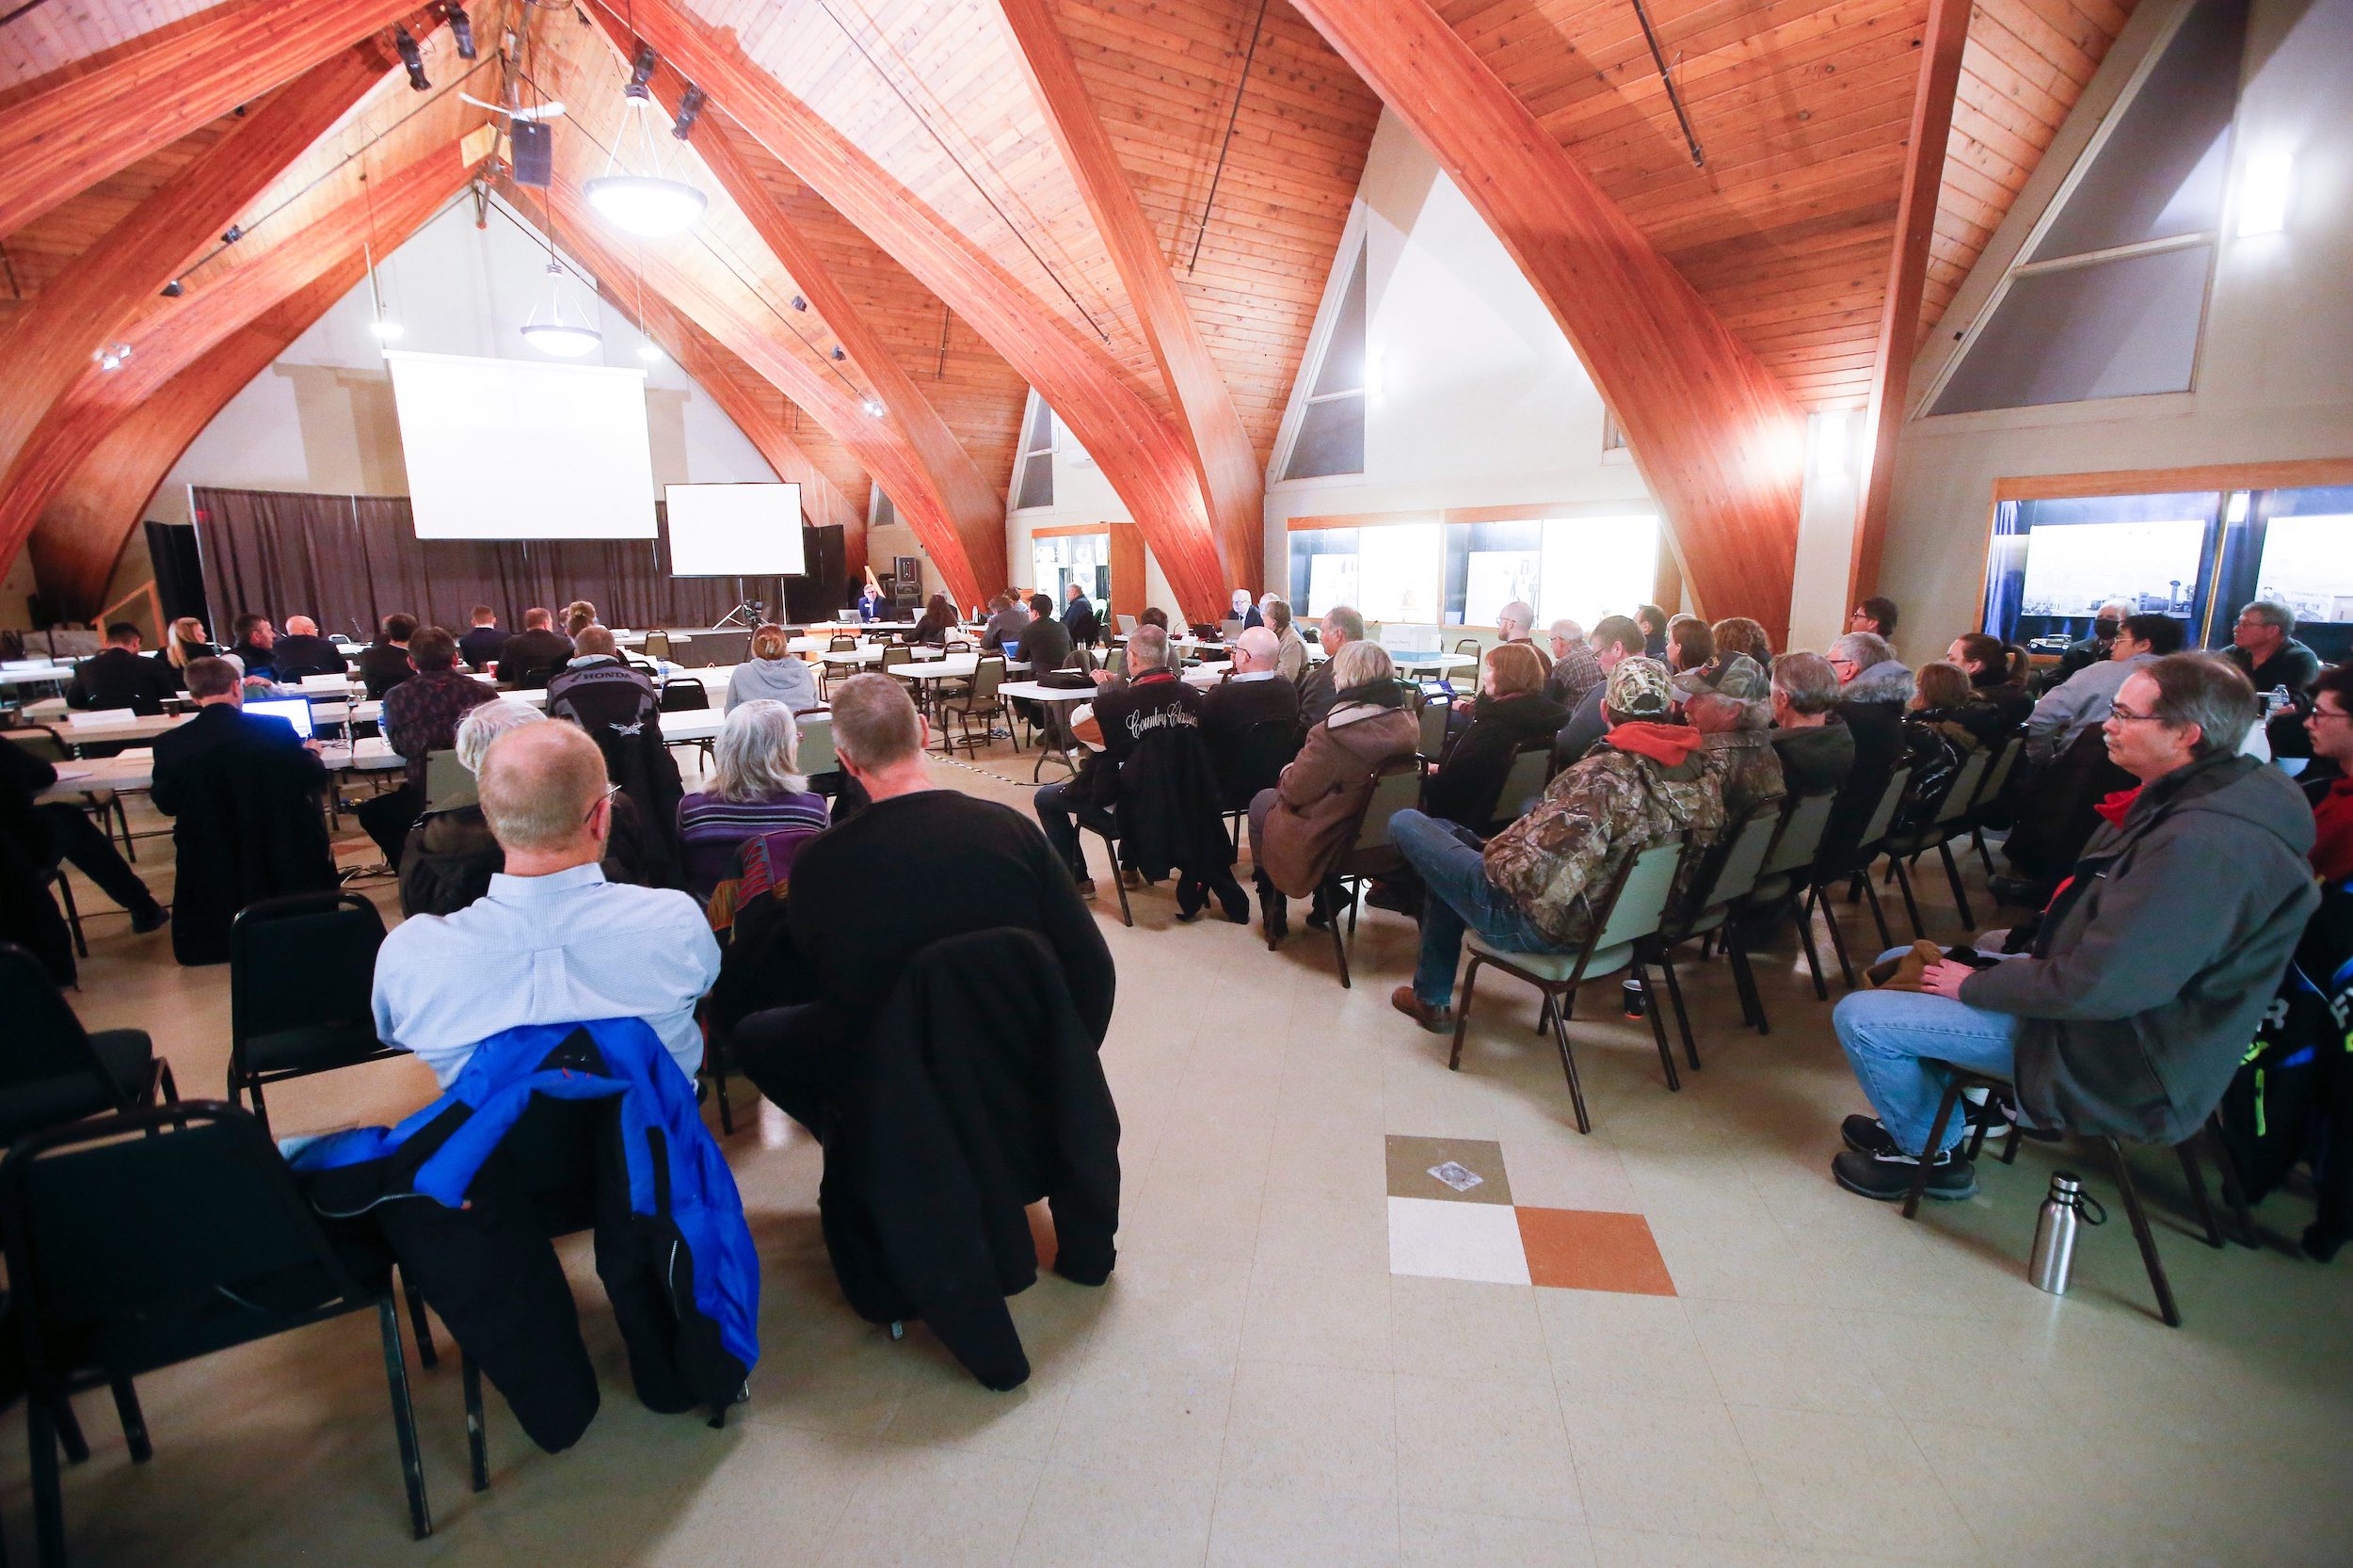 Dozens of people sit in a hall at the Mennonite Heritage Village in Steinbach, Manitoba to take part in a Clean Environment Commission hearing regarding Sio Silica's proposed sand mine